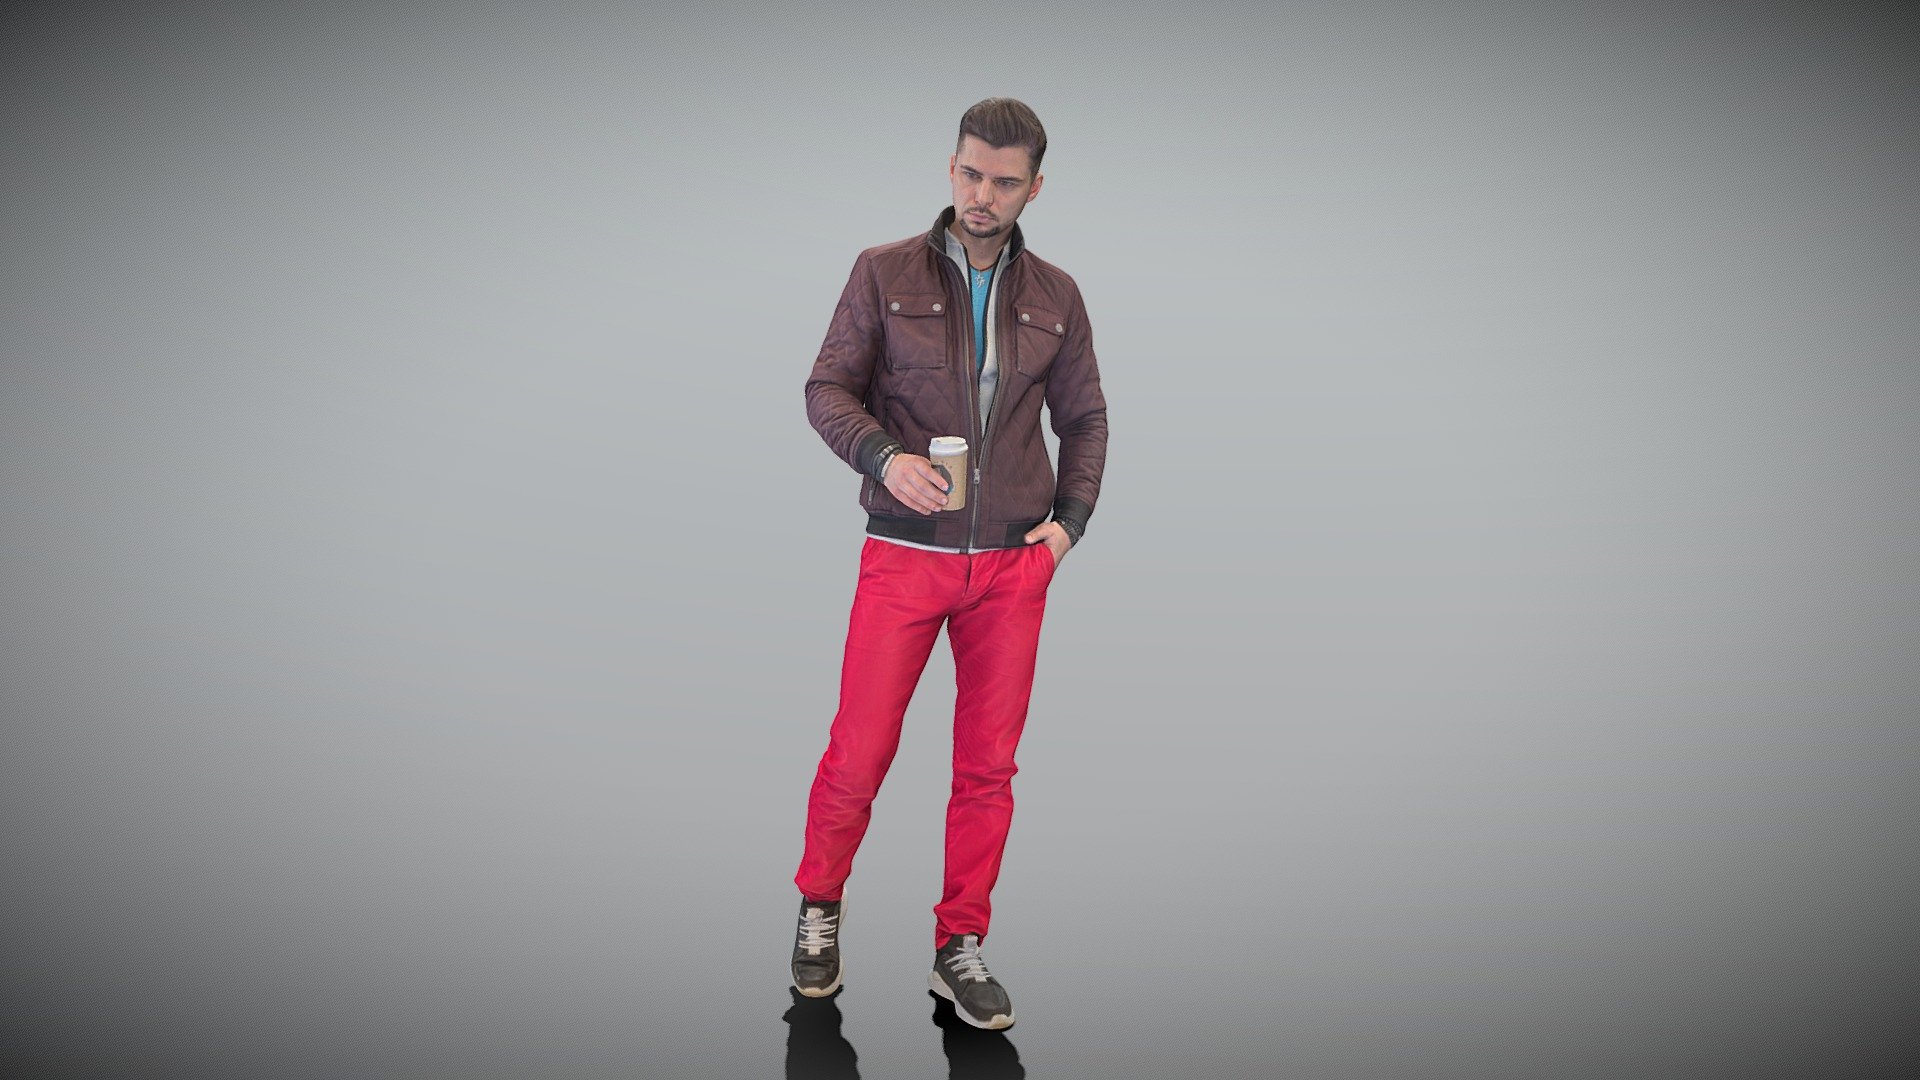 This is a true human size and detailed model of a handsome young man of Caucasian appearance dressed in casual style. The model is captured in casual pose to be perfectly matching to variety of architectural visualization, background character, product visualization e.g. urban installations, city designs, outdoor design presentations, VR/AR content, etc.

Technical specifications:




digital double 3d scan model

150k &amp; 30k triangles | double triangulated

high-poly model (.ztl tool with 5 subdivisions) clean and retopologized automatically via ZRemesher

sufficiently clean

PBR textures 8K resolution: Diffuse, Normal, Specular maps

non-overlapping UV map

no extra plugins are required for this model

Download package includes a Cinema 4D project file with Redshift shader, OBJ, FBX, STL files, which are applicable for 3ds Max, Maya, Unreal Engine, Unity, Blender, etc. All the textures you will find in the “Tex” folder, included into the main archive.

3D EVERYTHING

Stand with Ukraine! - Man in jacket walking 396 - Buy Royalty Free 3D model by deep3dstudio 3d model